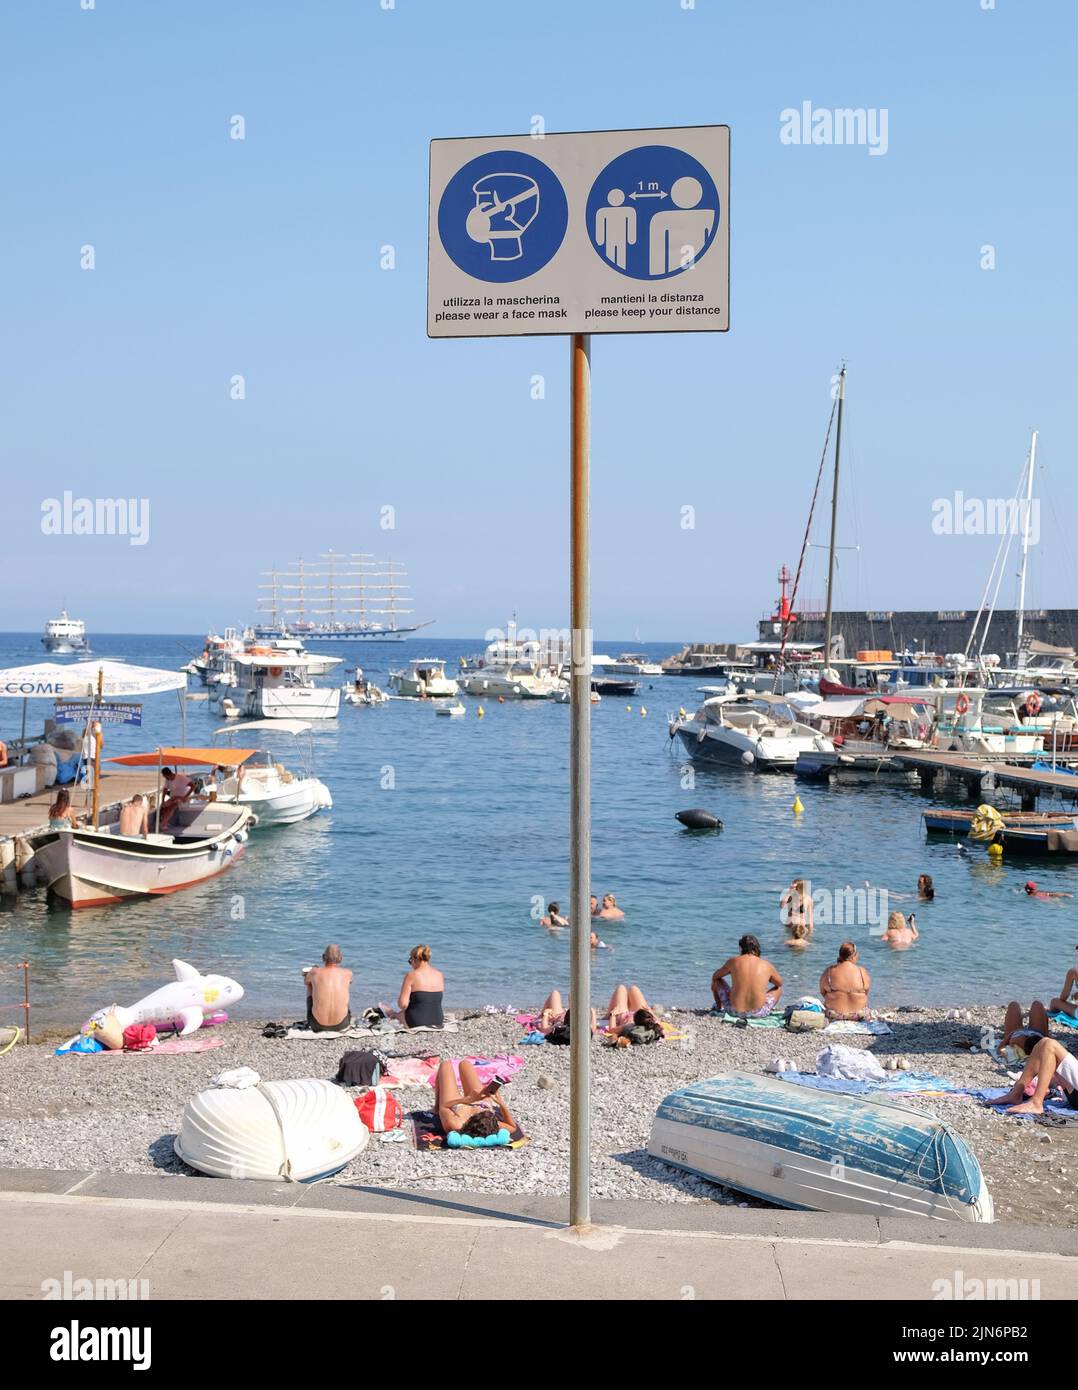 Covid information warning signs at Positano village beach front Italy showing beach and waterfront in the background.Social distancing and masks. Stock Photo